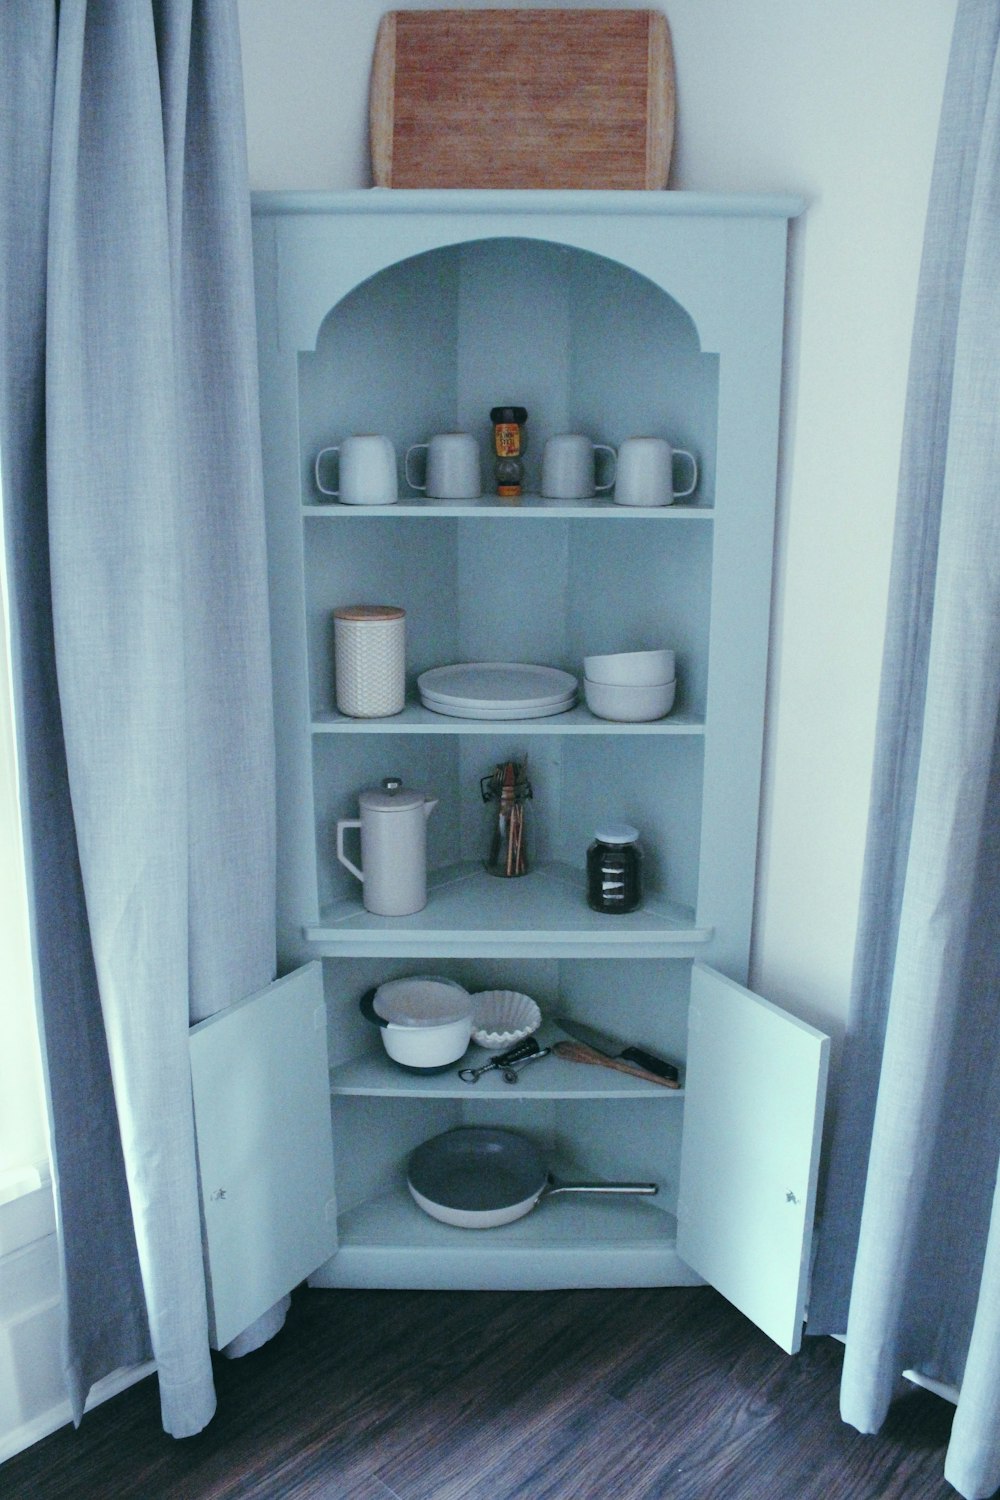 a shelf with dishes and cups on it